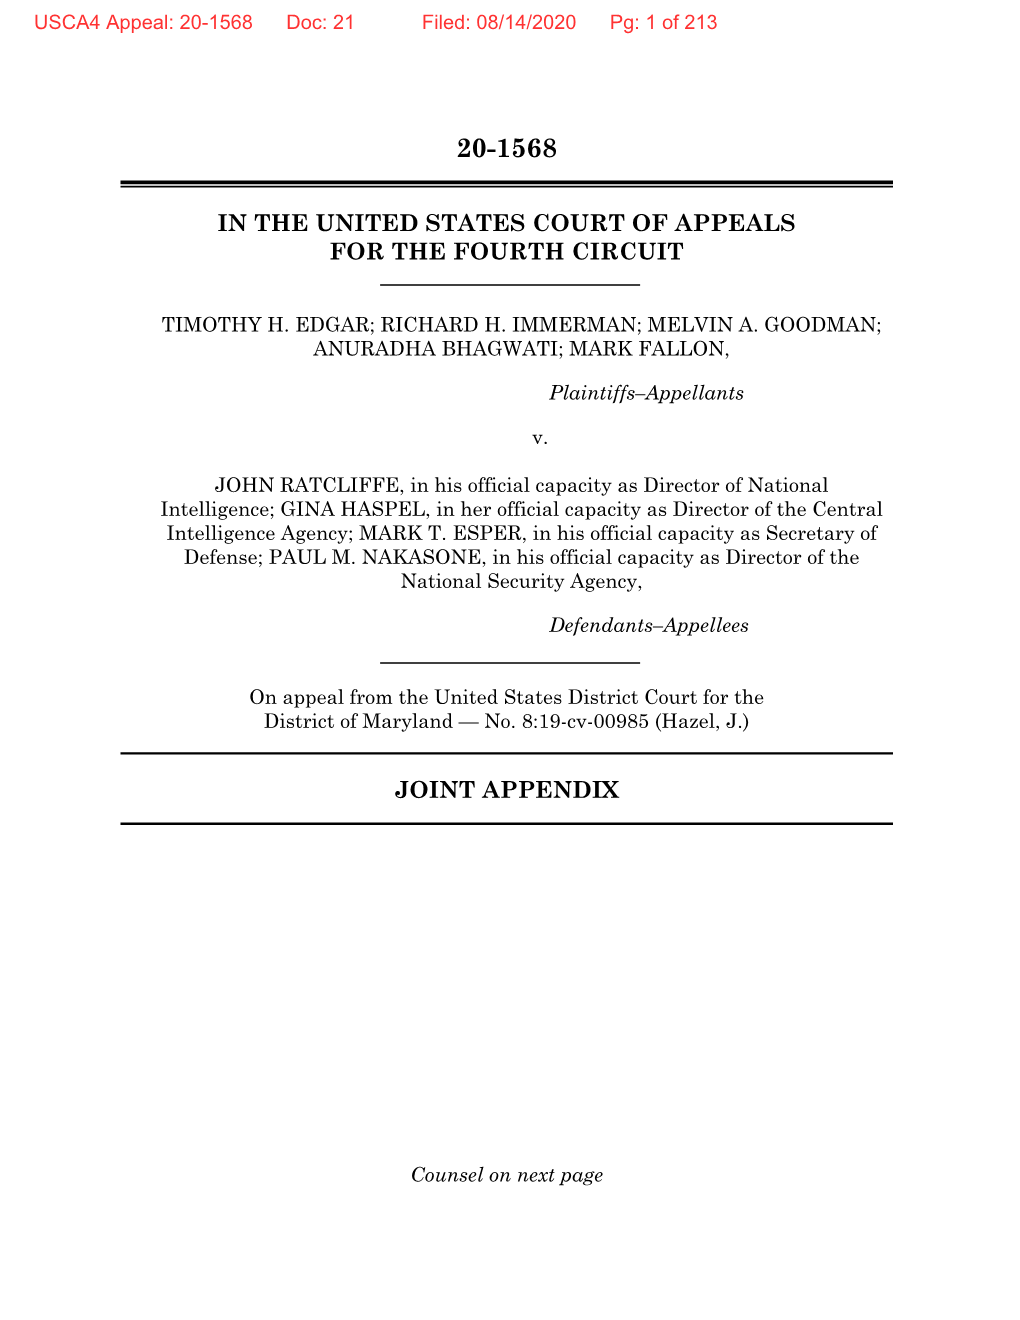 In the United States Court of Appeals for the Fourth Circuit Joint Appendix